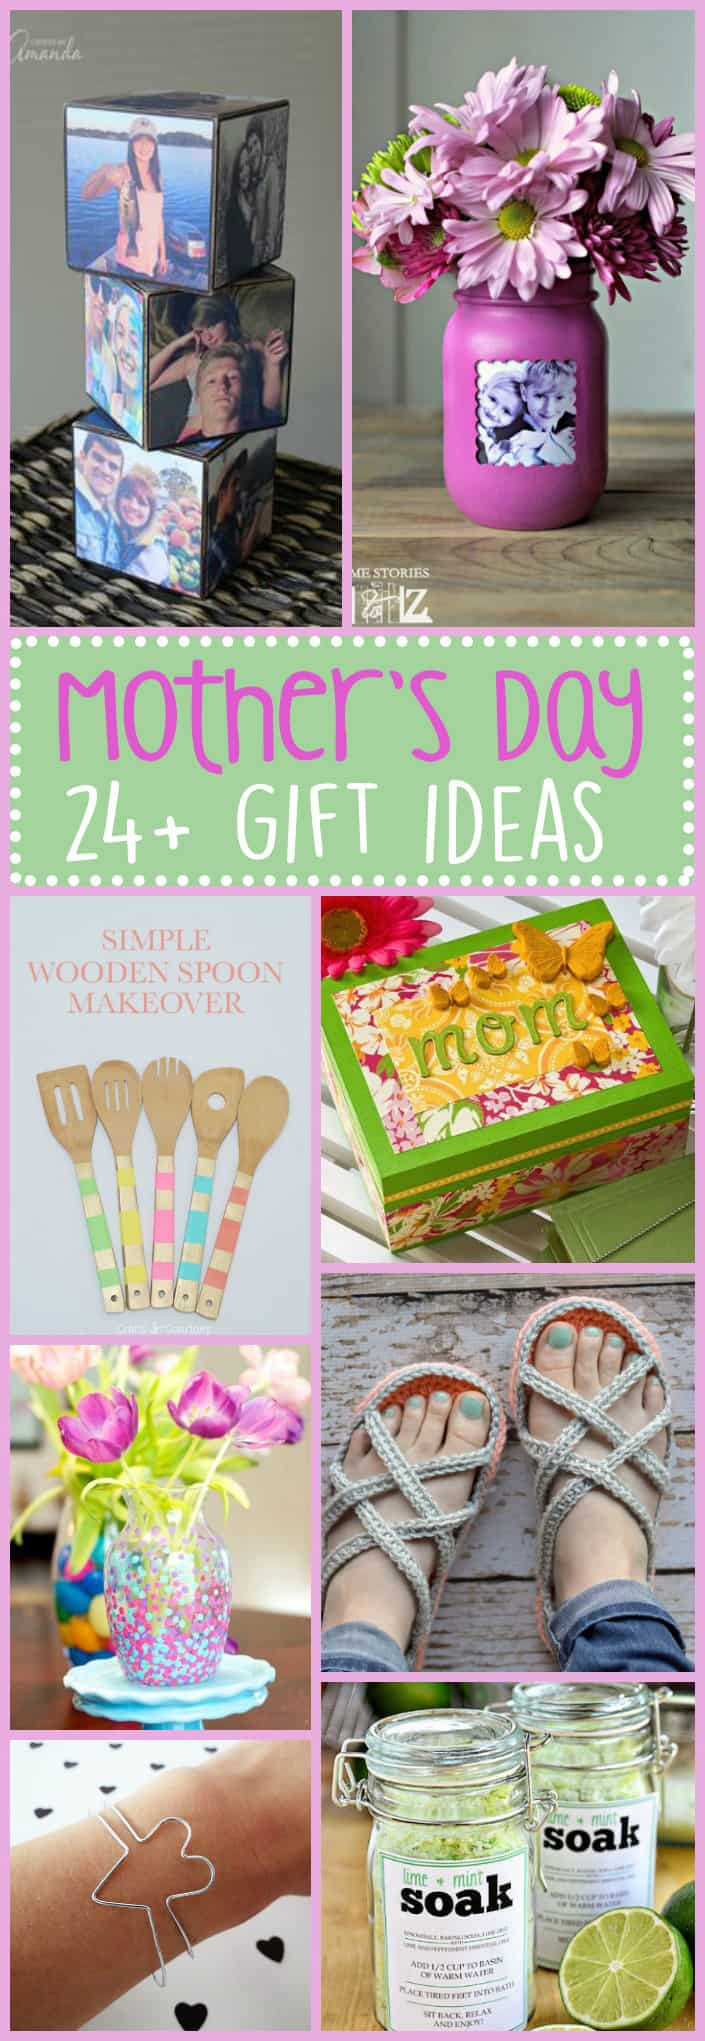 Mother's Day Gift Ideas Pinterest
 Mother s Day Gift Ideas 24 t ideas for Mother s Day